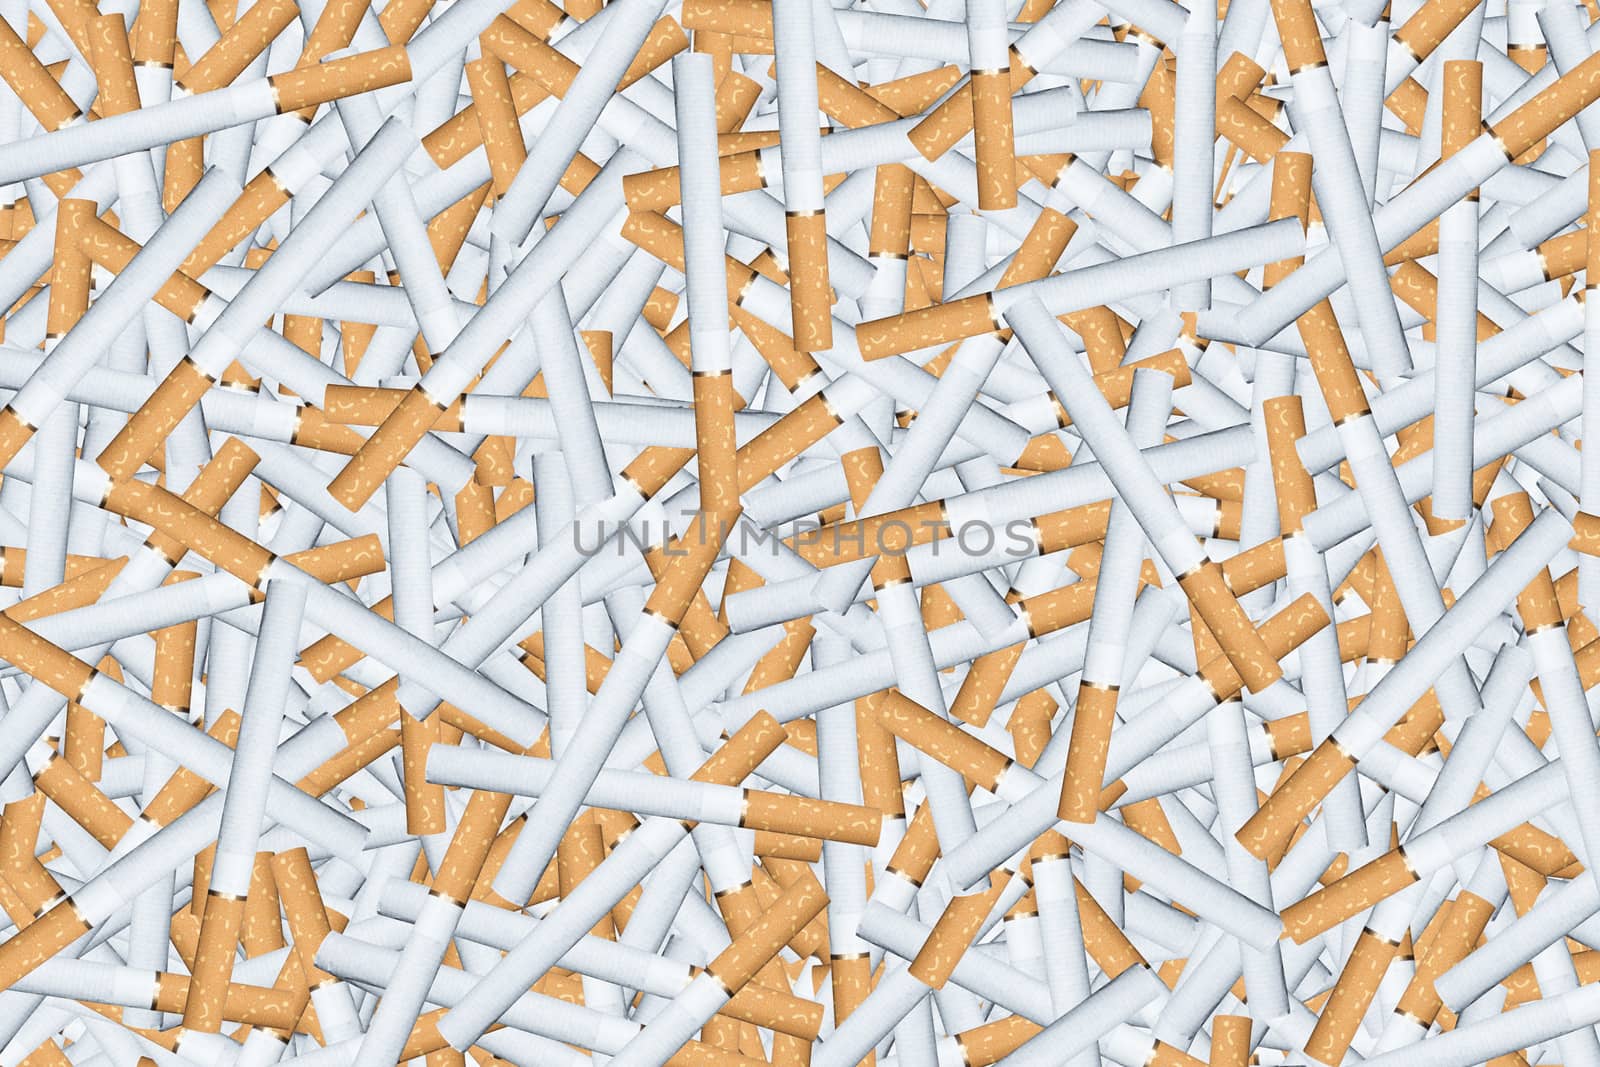 Background with a lot of cigarettes with filter